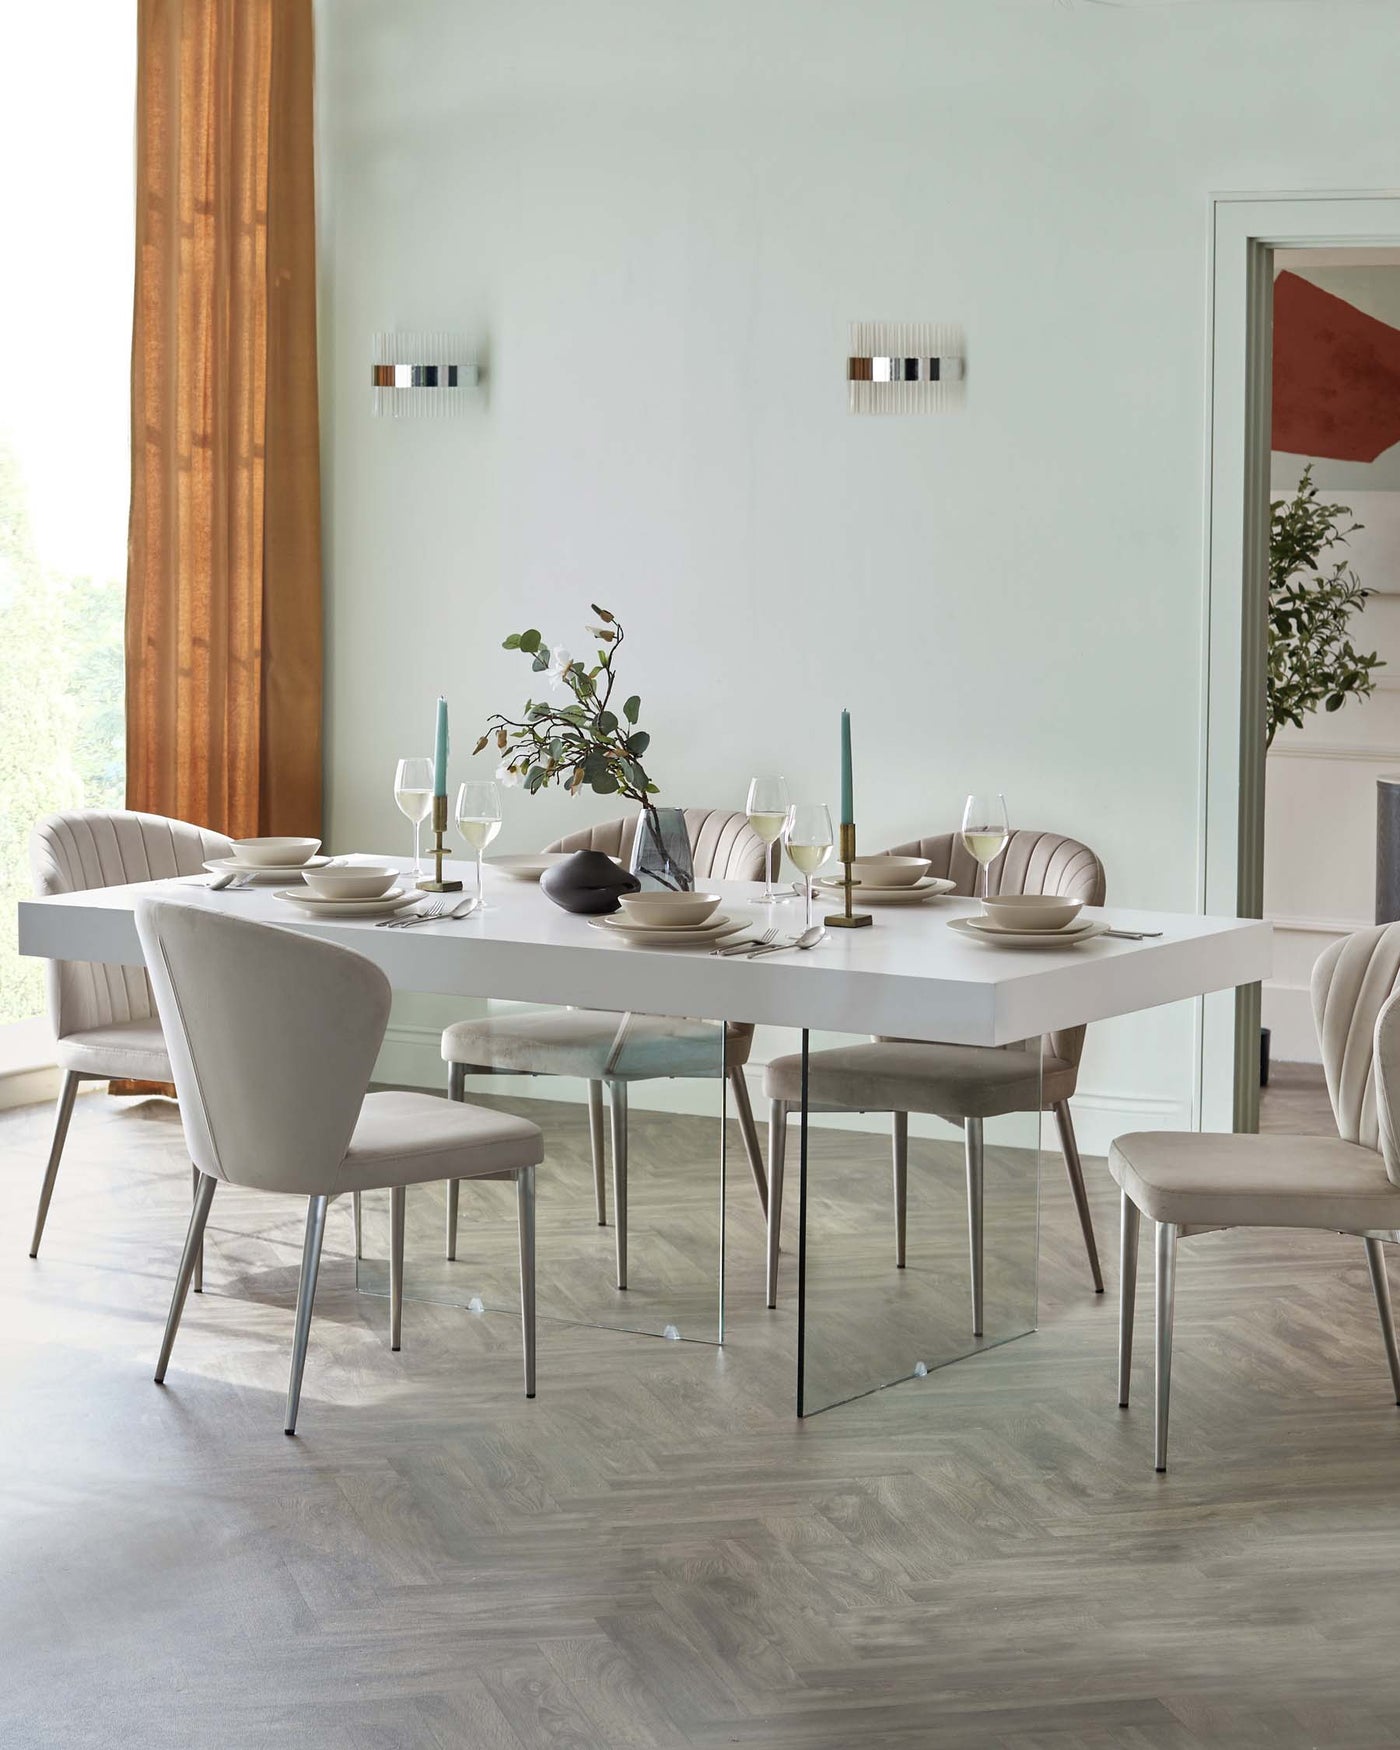 Modern dining room furniture set featuring a sleek white rectangular table with clear glass legs and six elegant upholstered chairs in a soft neutral tone, with subtle channel tufting and slim metal legs.